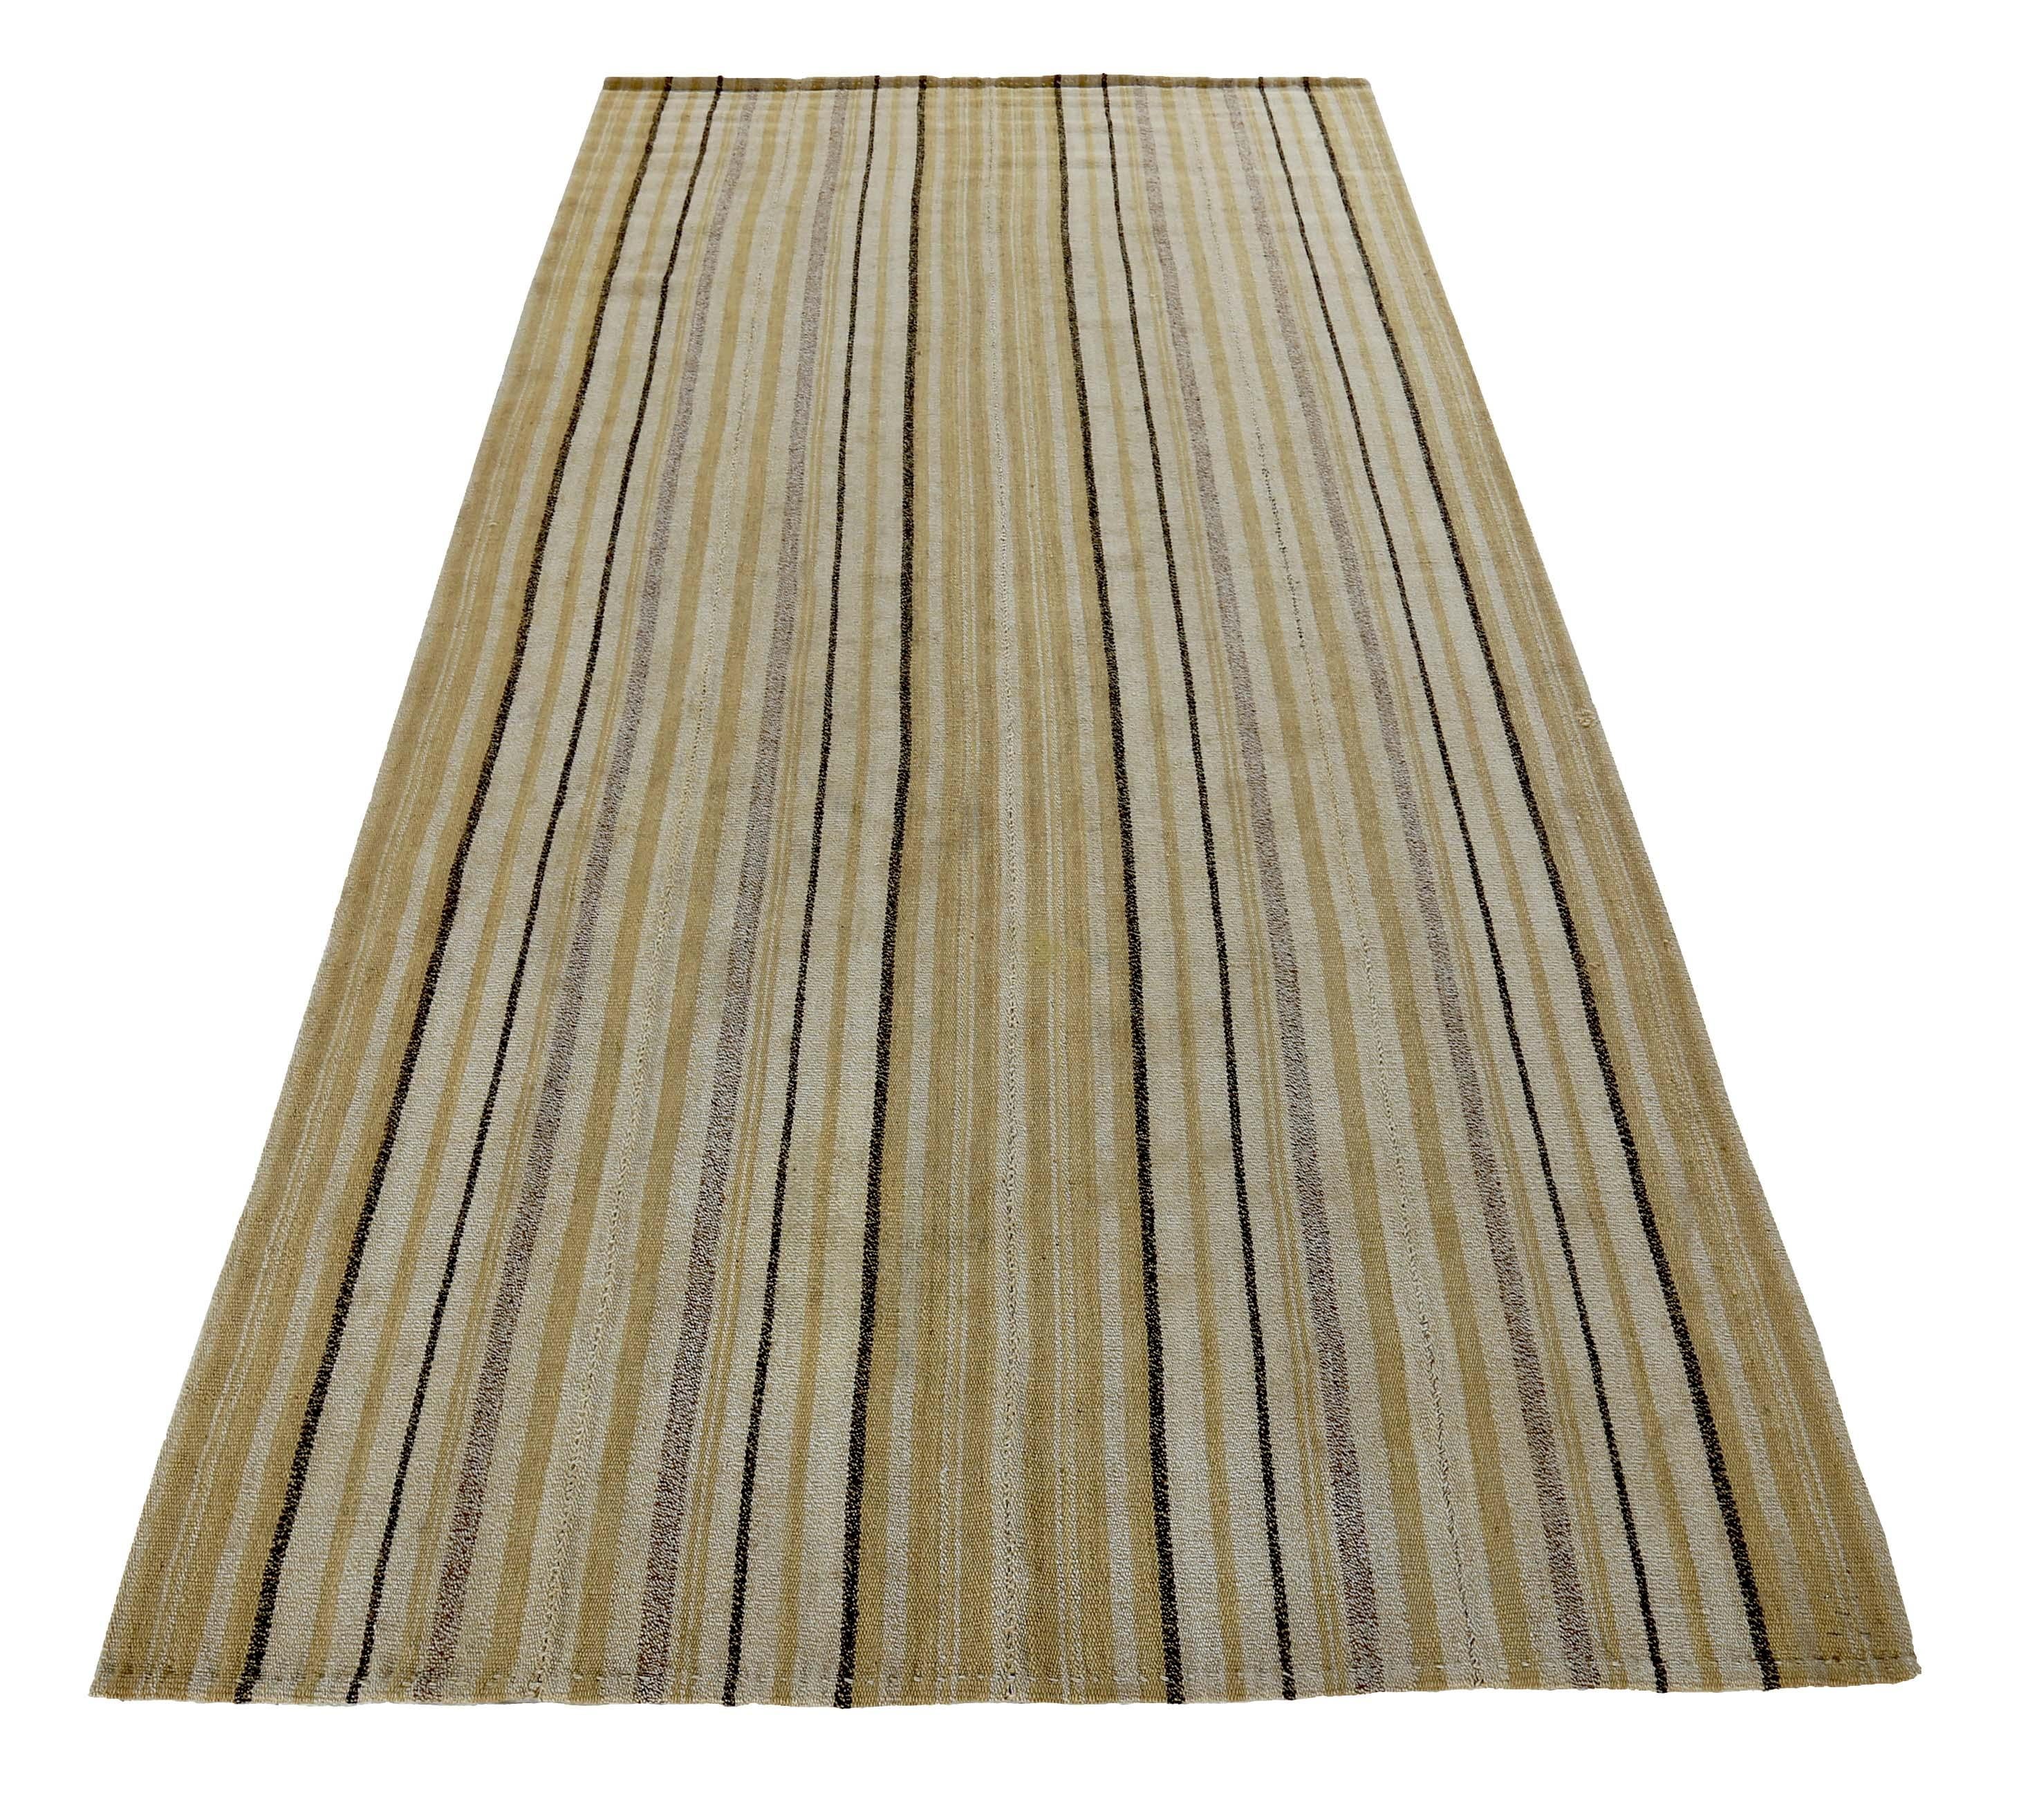 Turkish rug handwoven from the finest sheep’s wool and colored with all-natural vegetable dyes that are safe for humans and pets. It’s a traditional Kilim flat-weave design featuring black and ivory stripes over a lovely beige field. It’s a stunning